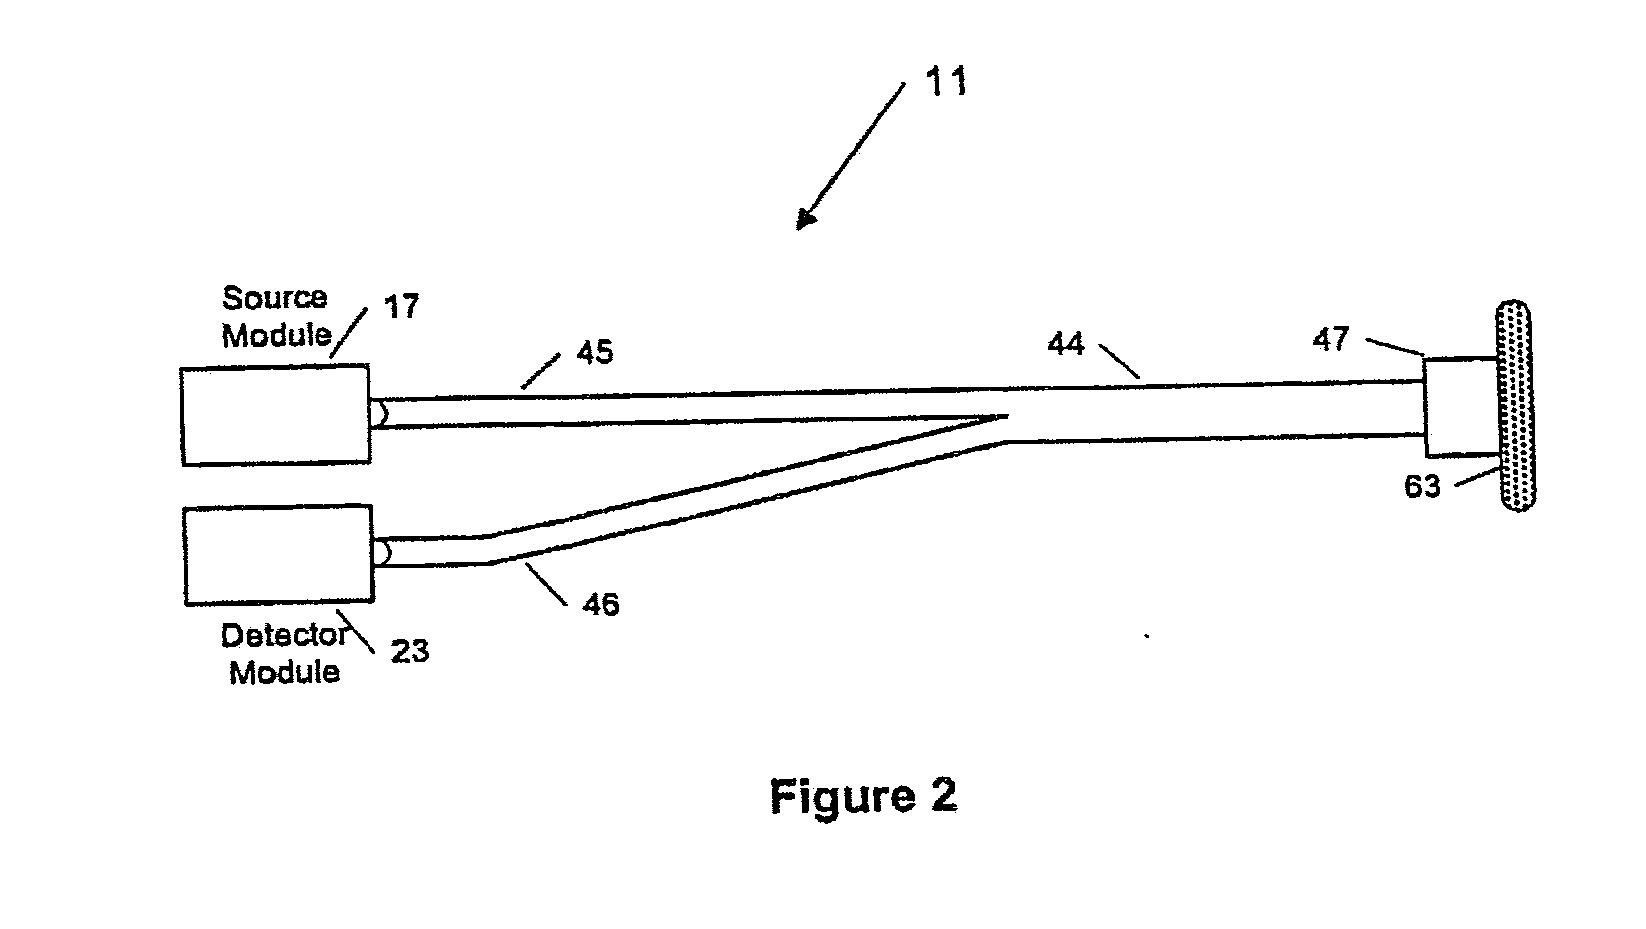 Method and Apparatus for the Non-Invasive Sensing of Glucose in a Human Subject